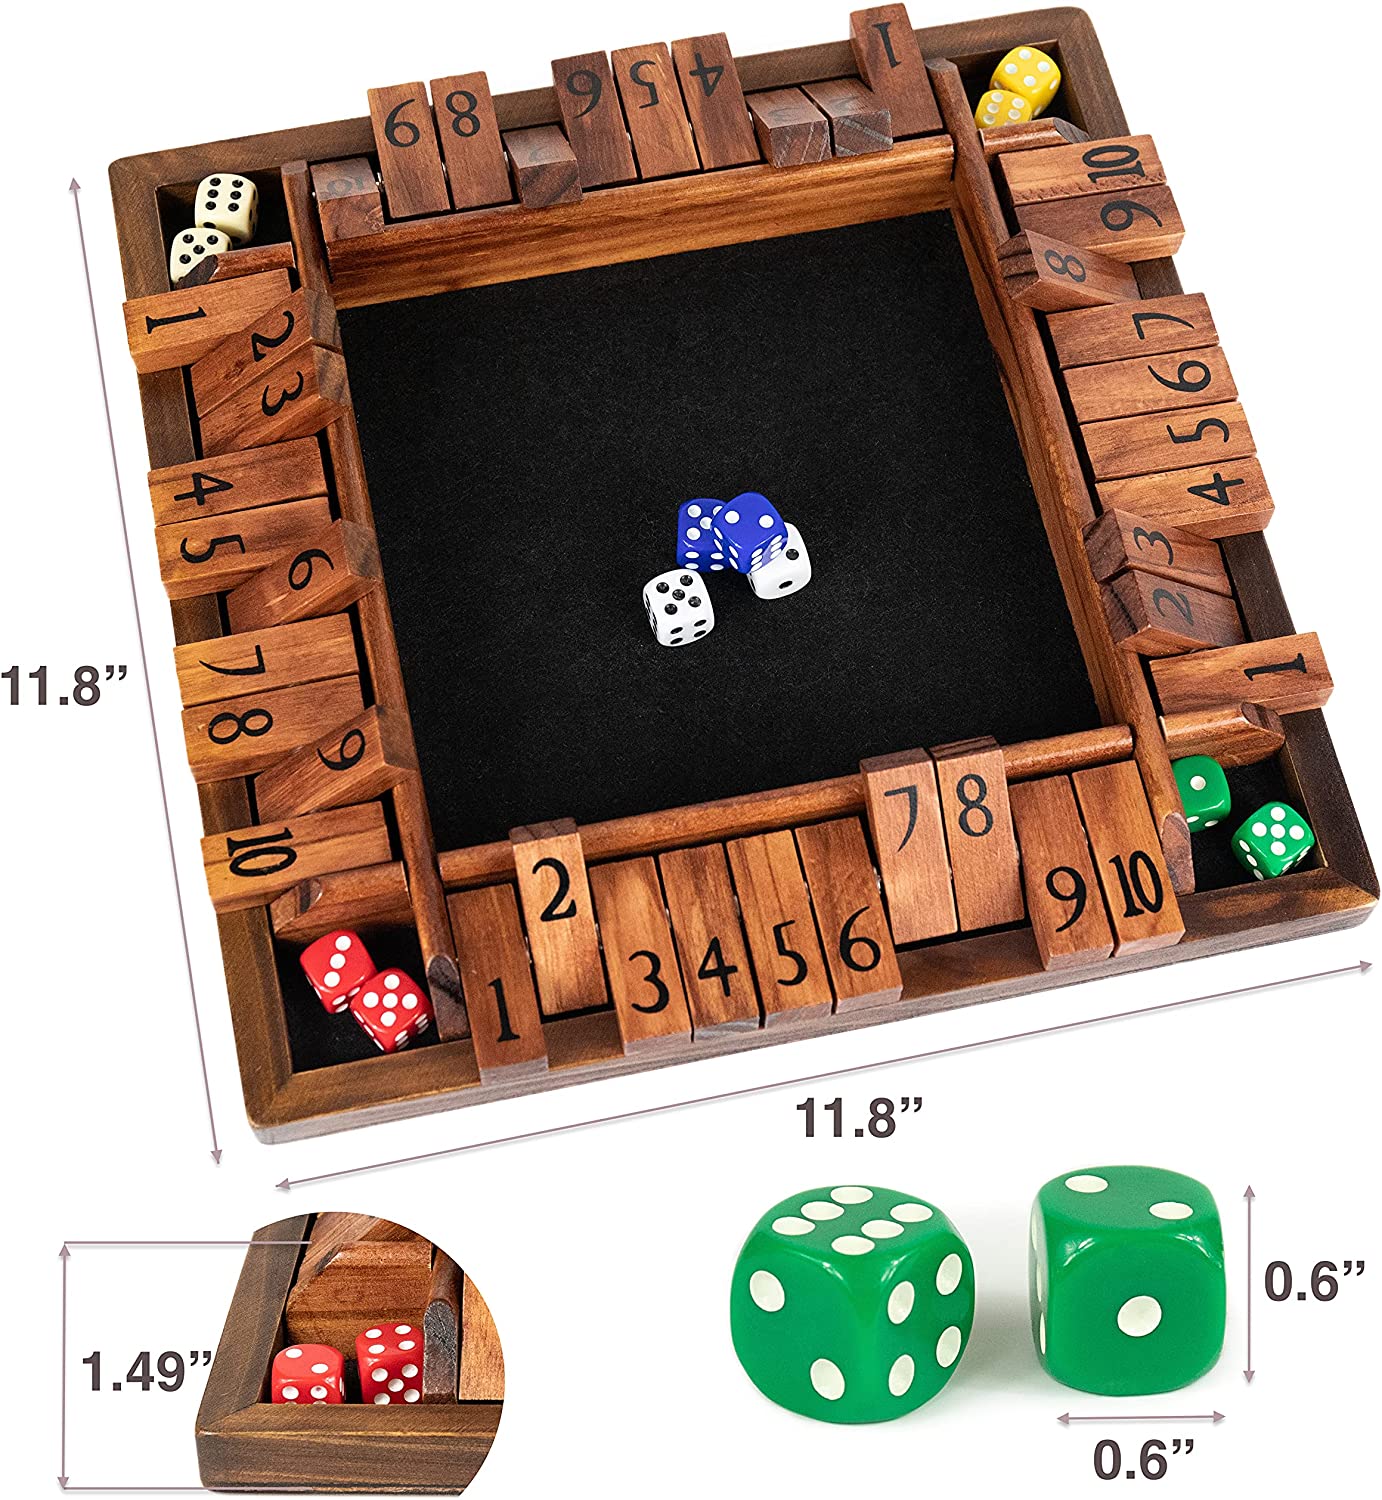 board game: Big Game Box: 12 Games/ Playing Pieces/ Dice